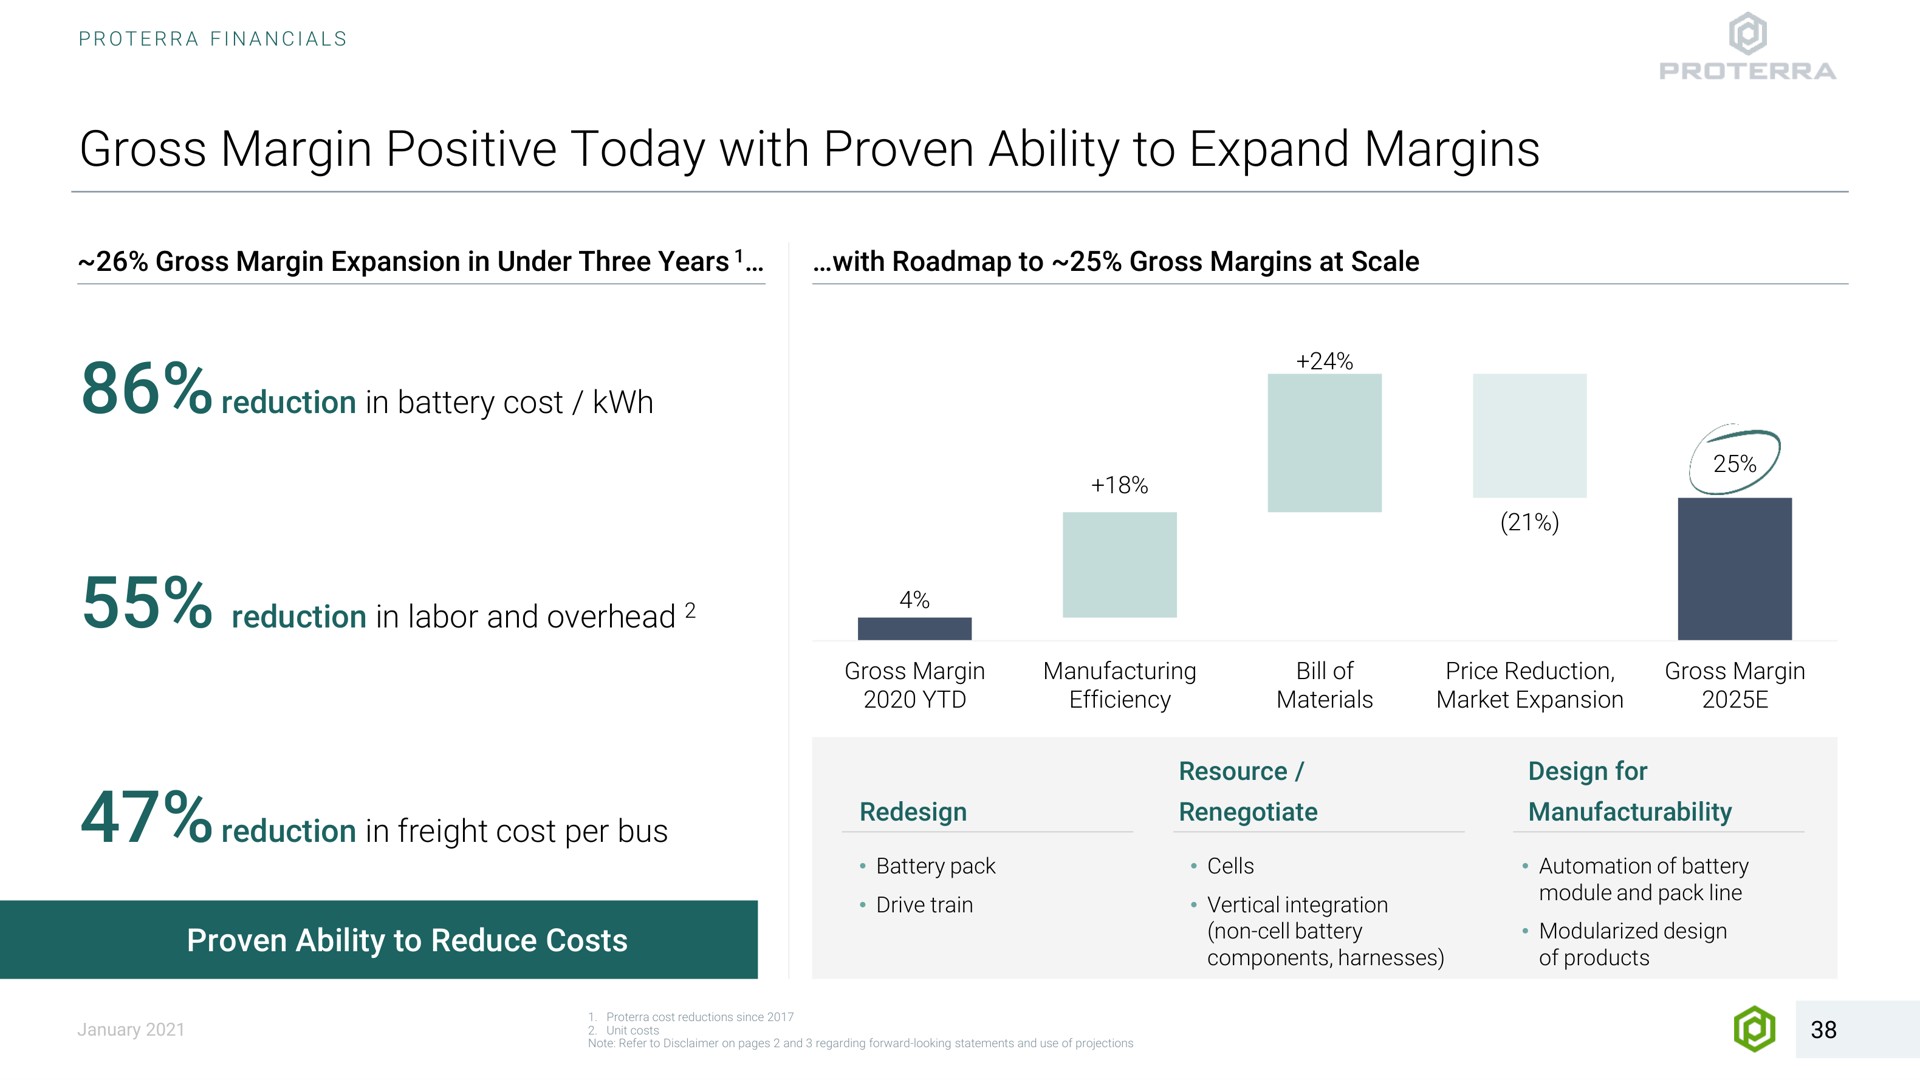 gross margin positive today with proven ability to expand margins expansion in under three years at scale redesign battery pack drive train manufacturing efficiency bill of materials price reduction market expansion resource renegotiate cells vertical integration non cell battery components harnesses design for of battery design of products at reduction in freight cost per bus reduce costs | Proterra